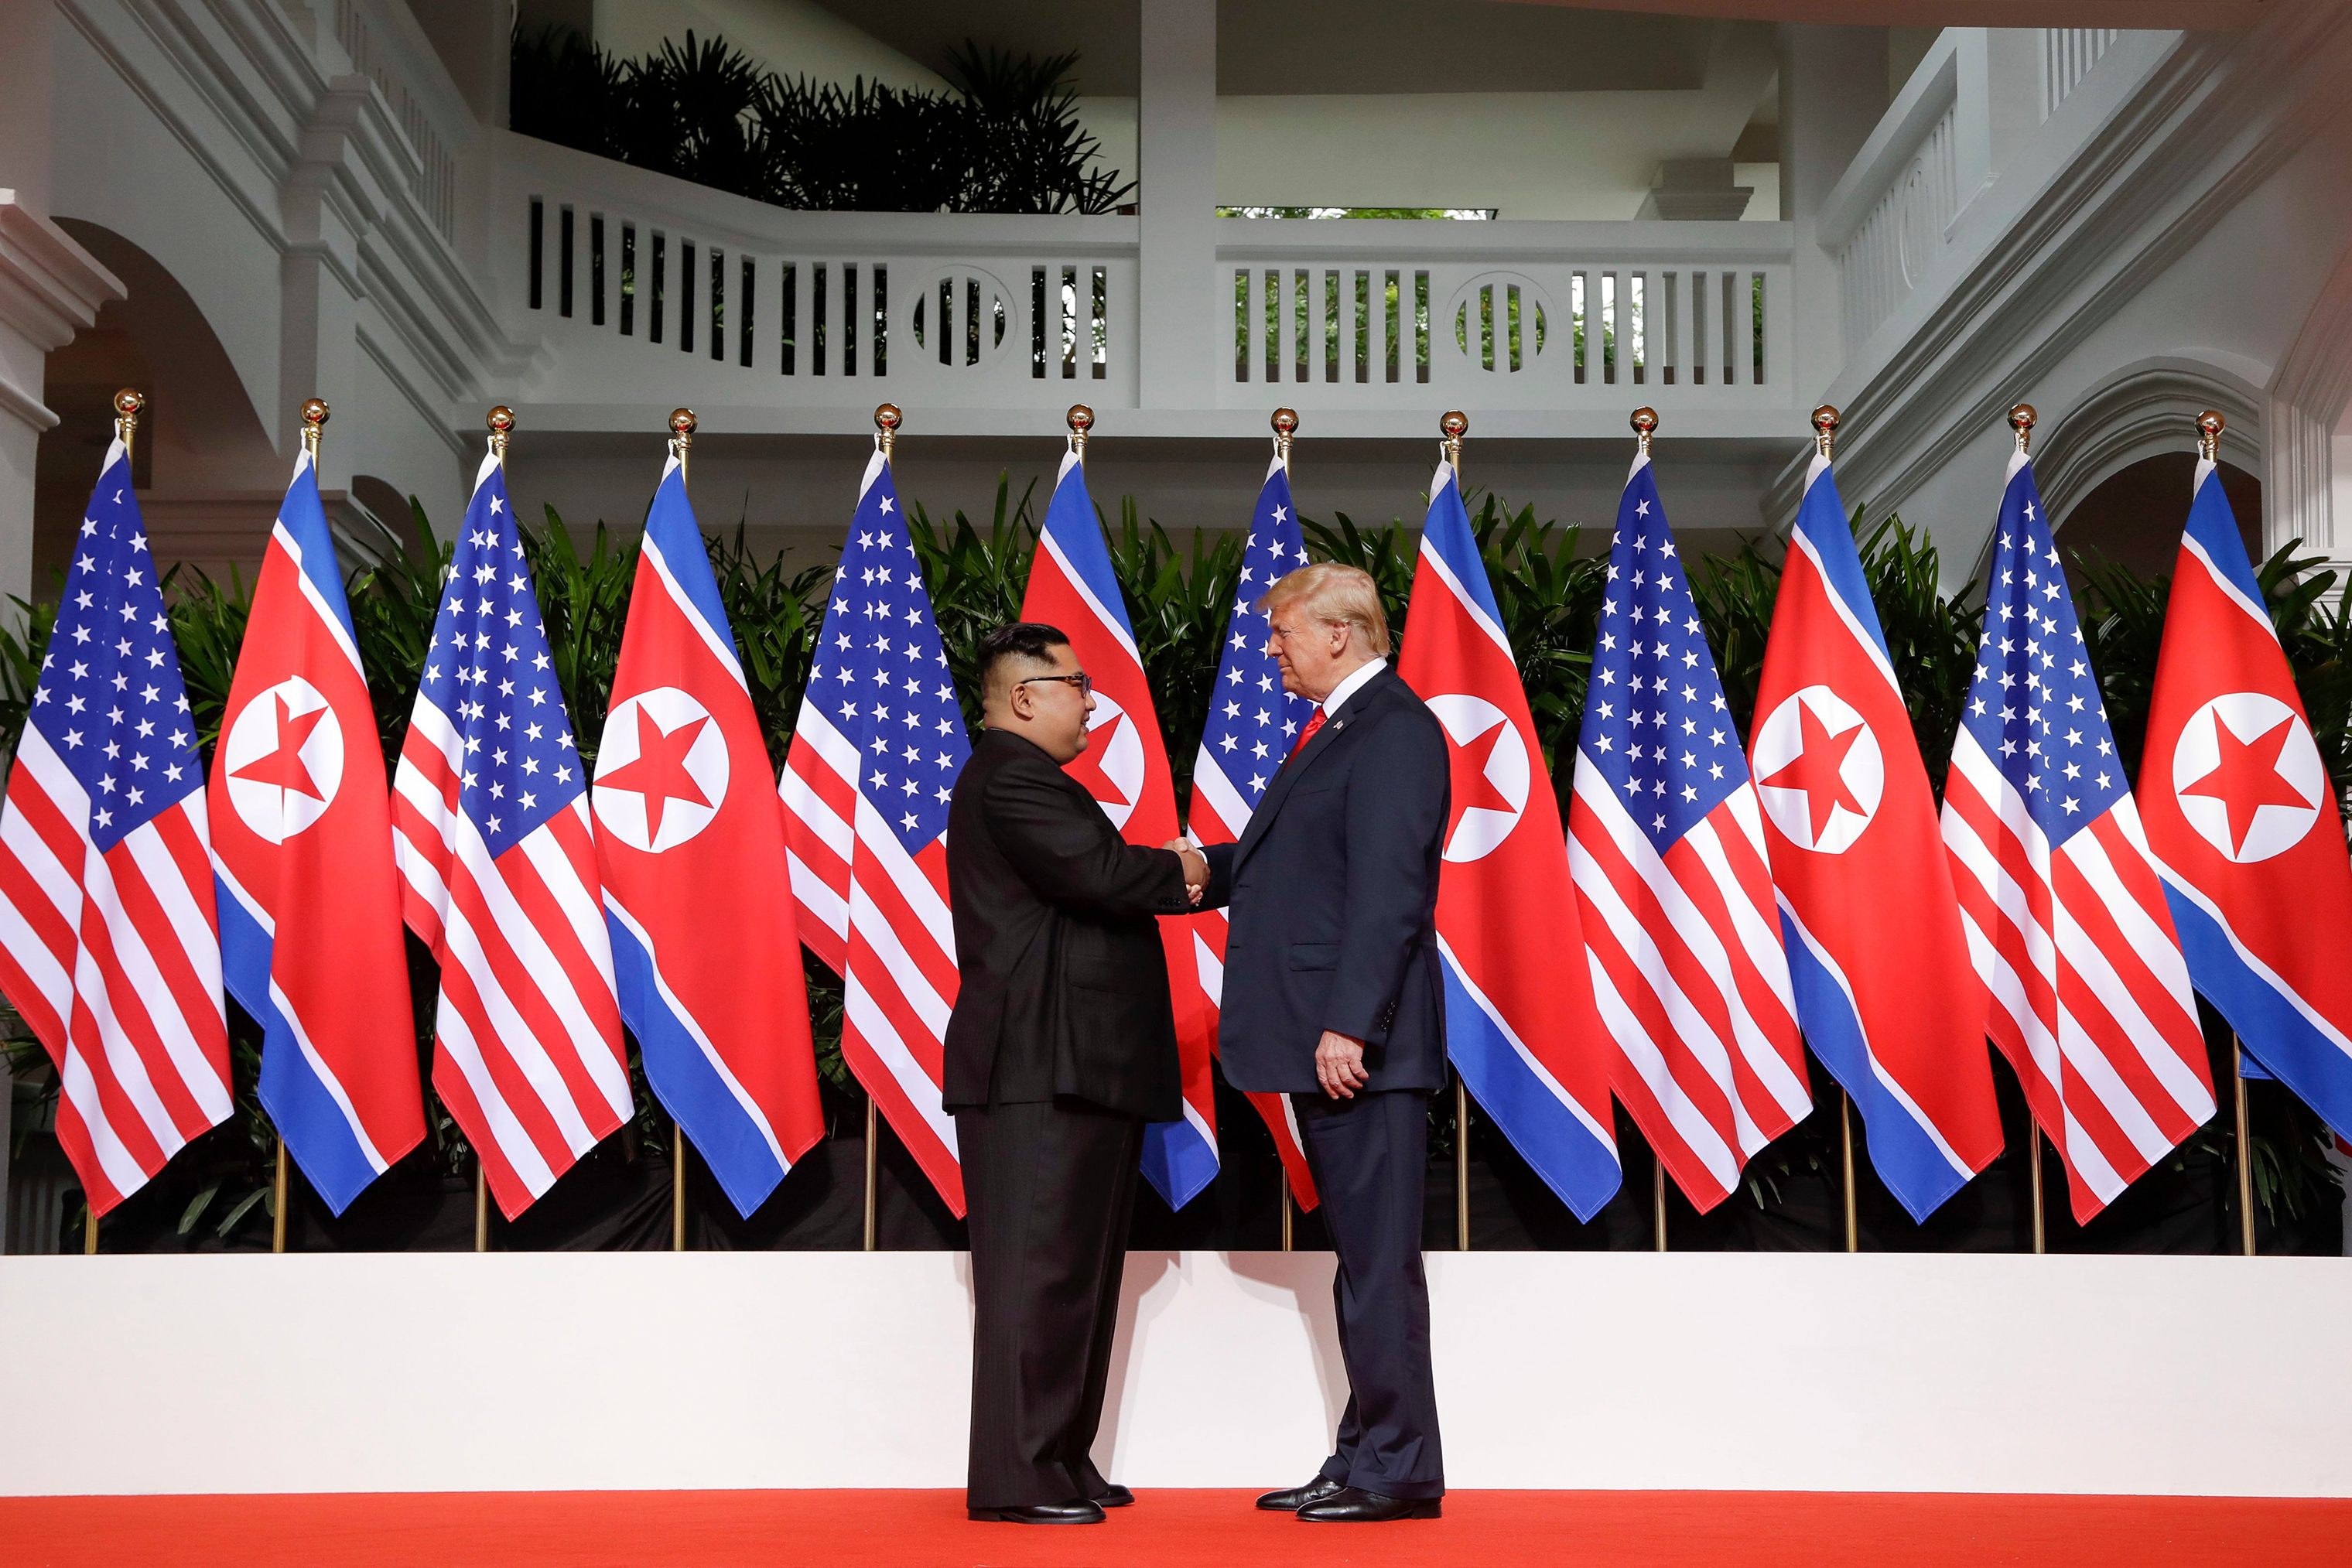 President Trump and North Korea's Kim Jong Un shake hands at their historic summit in Singapore on June 12, 2018. (Evan Vucci—AP/Shutterstock)